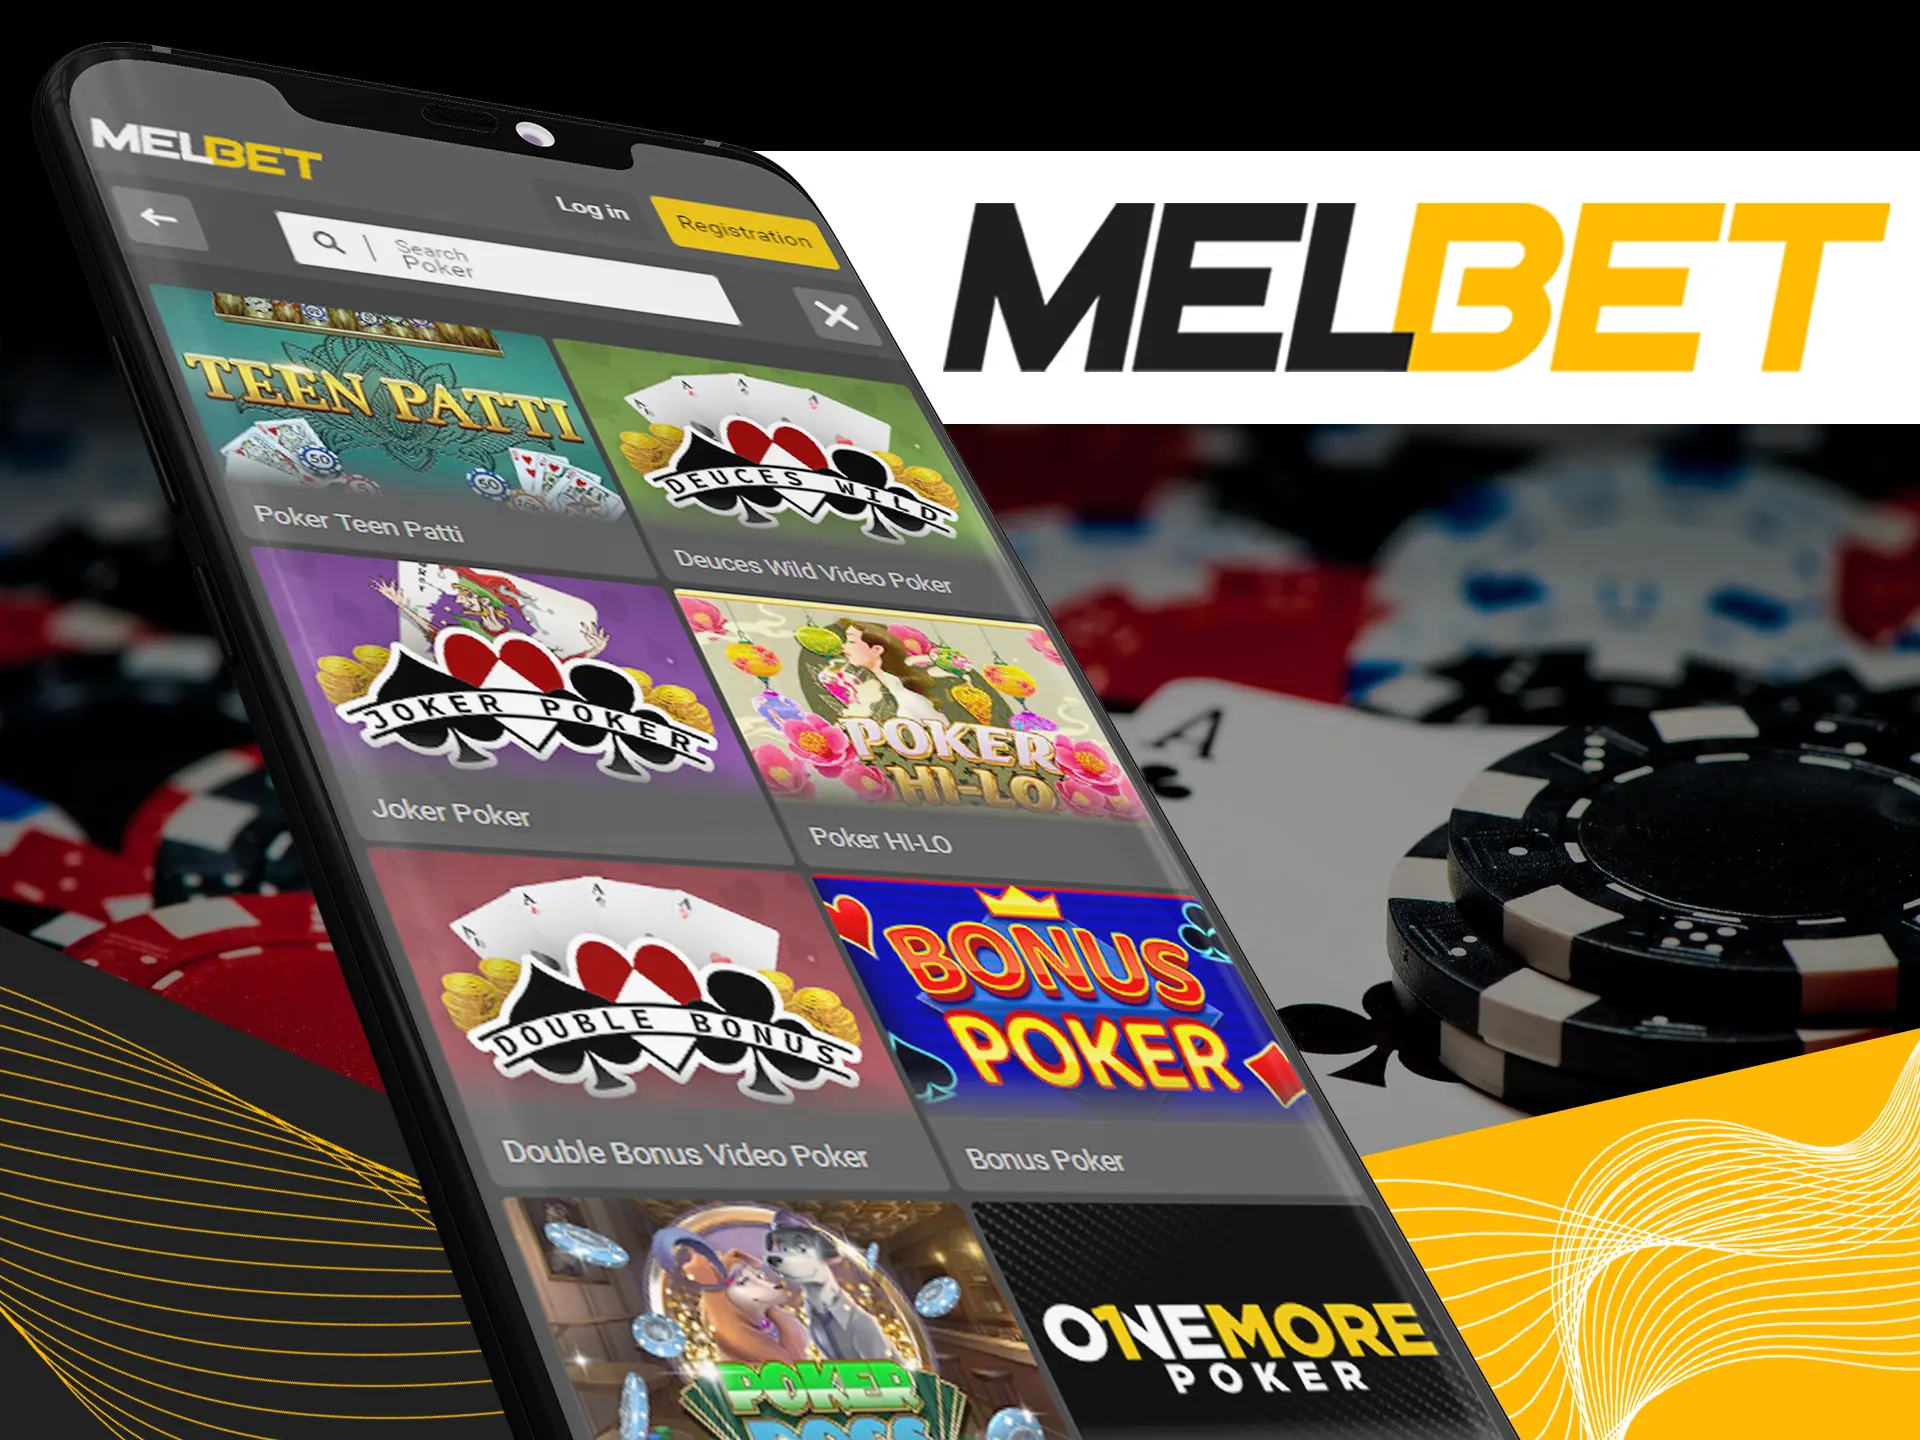 Play poker games with real people at Melbet.